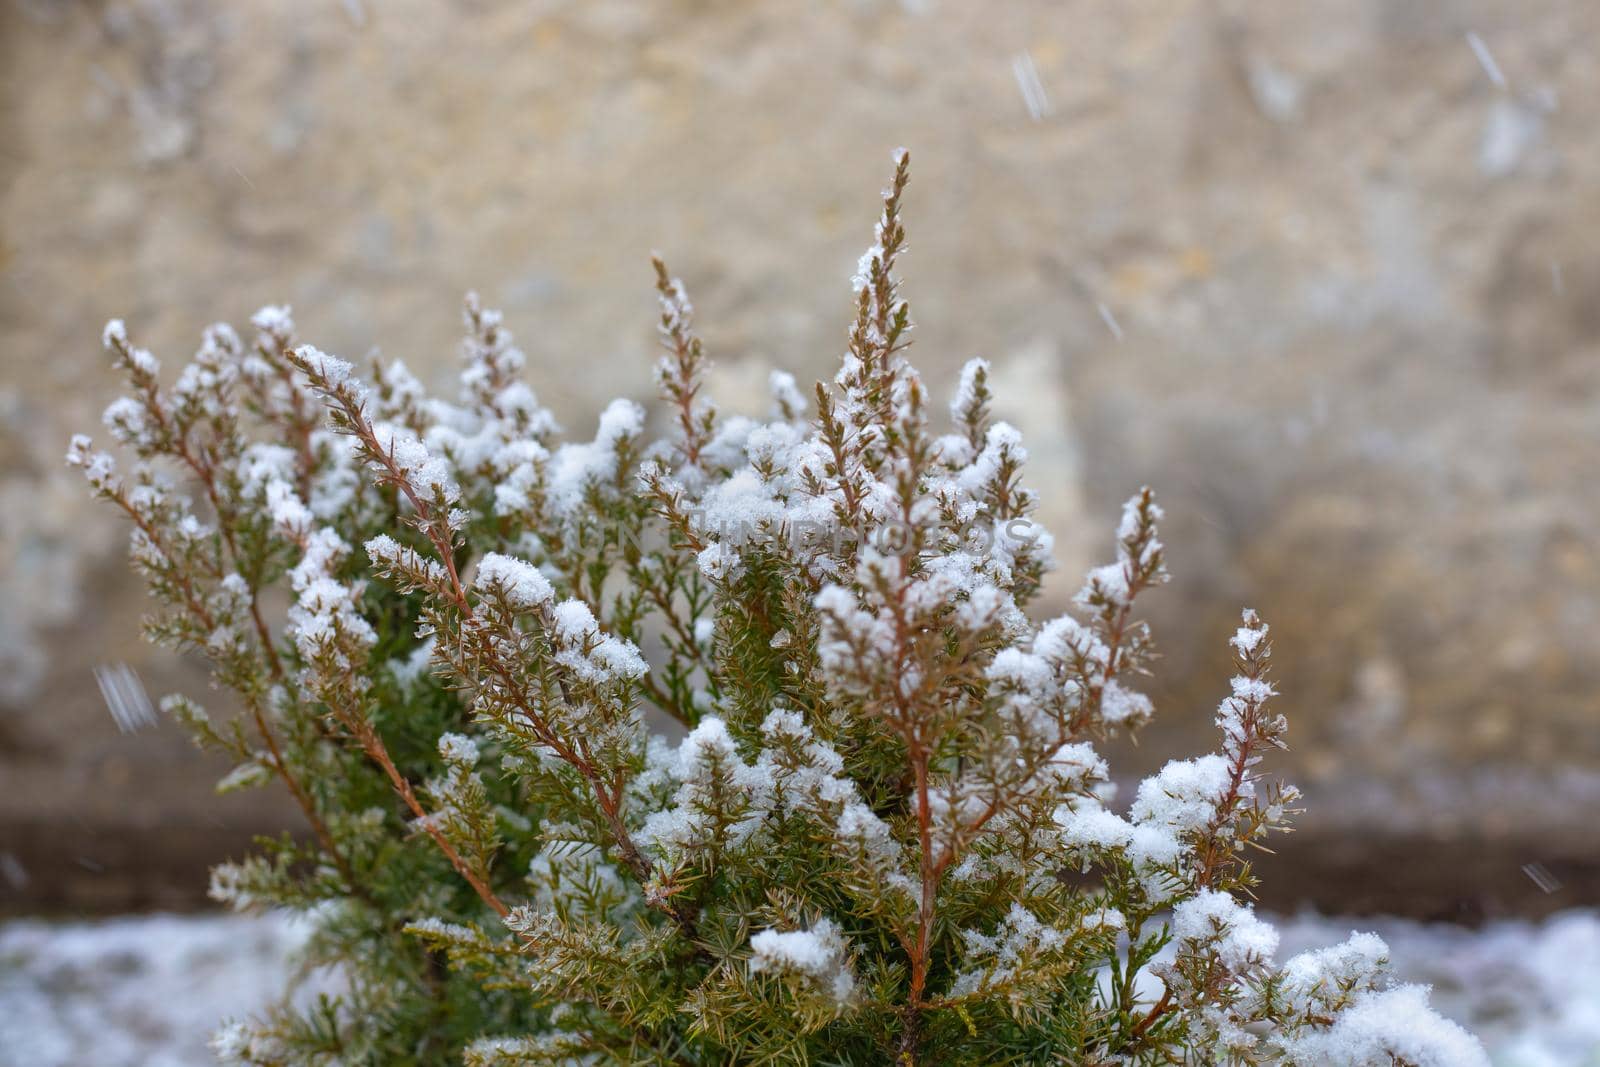 Juniper bush in the garden in winter under the snow. The onset of cold weather.